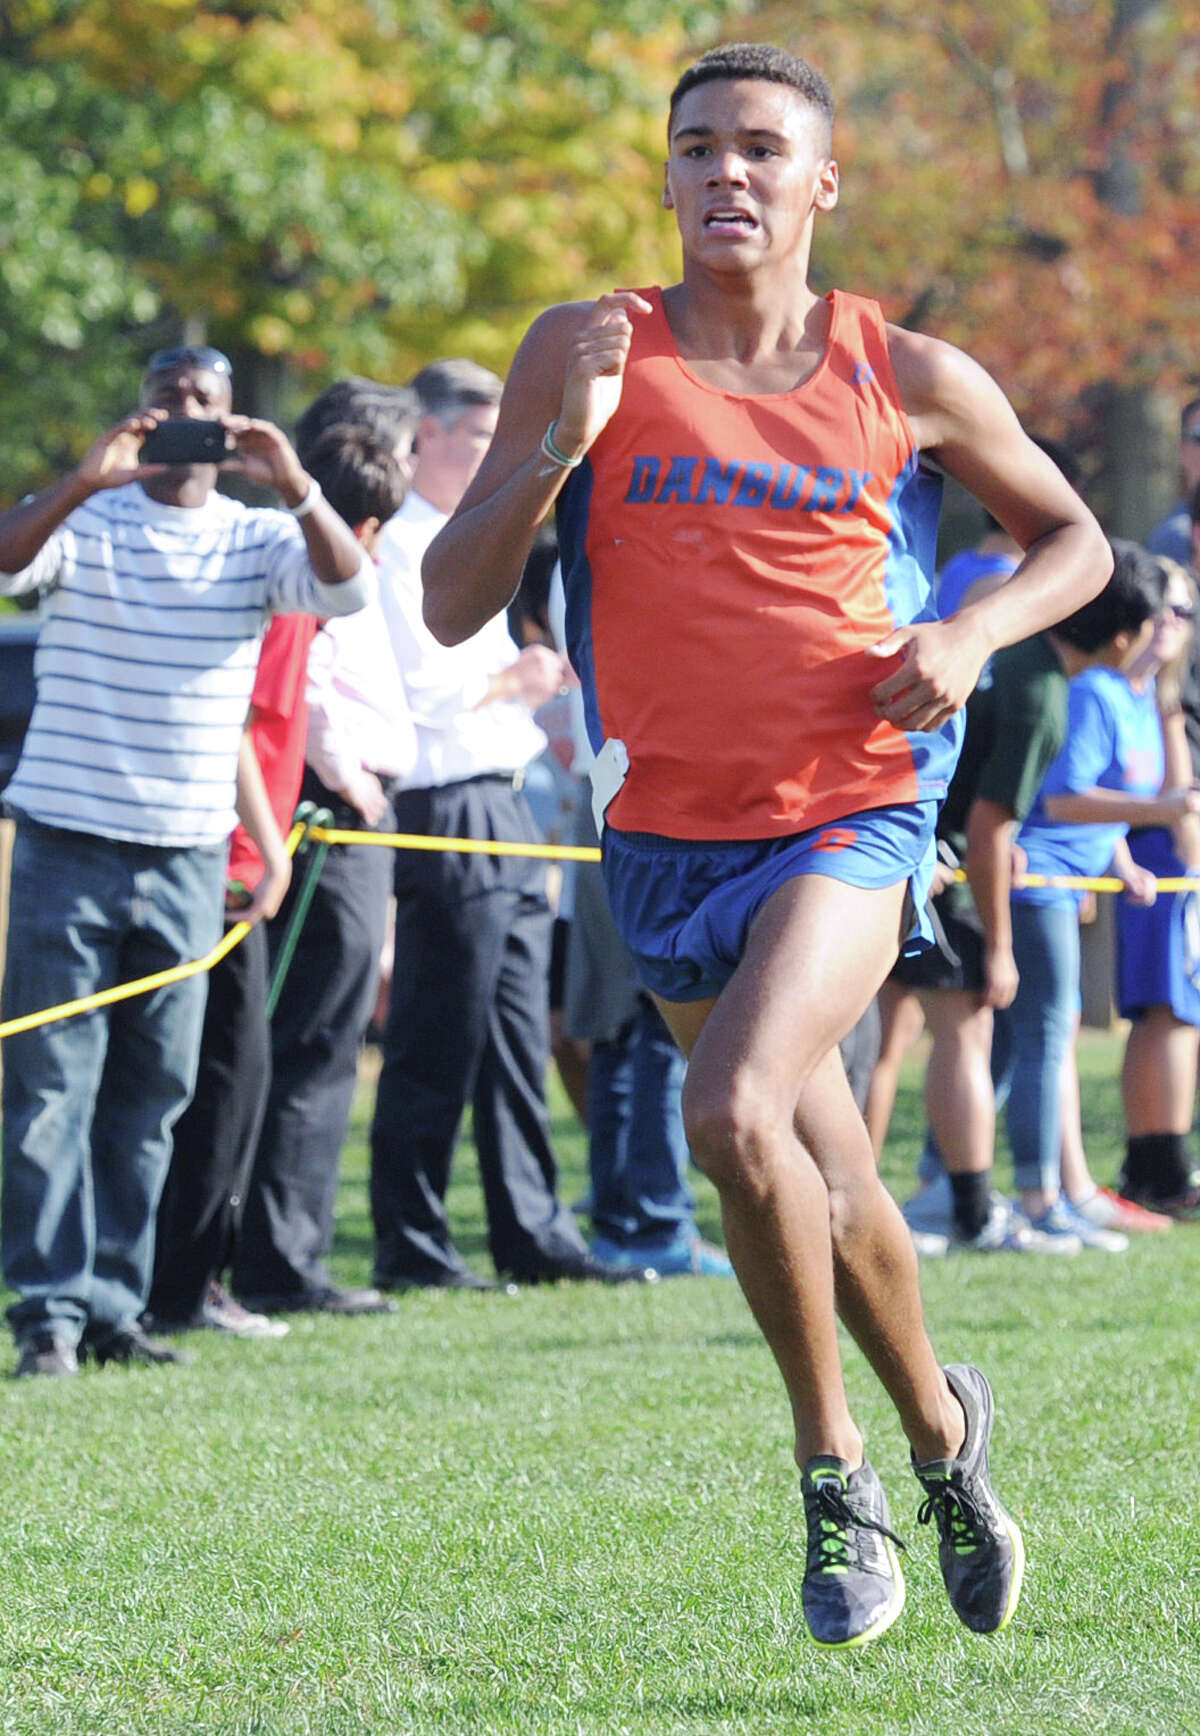 FILE PHOTO: Danbury High School runner Trevor Reed competes during the FCIAC Boys Cross Country Championship 5,000 meter run at Waveny Park in New Canaan, Conn., Wednesday, Oct. 21, 2015. Reed finished in 6th place with a time of 16:00.